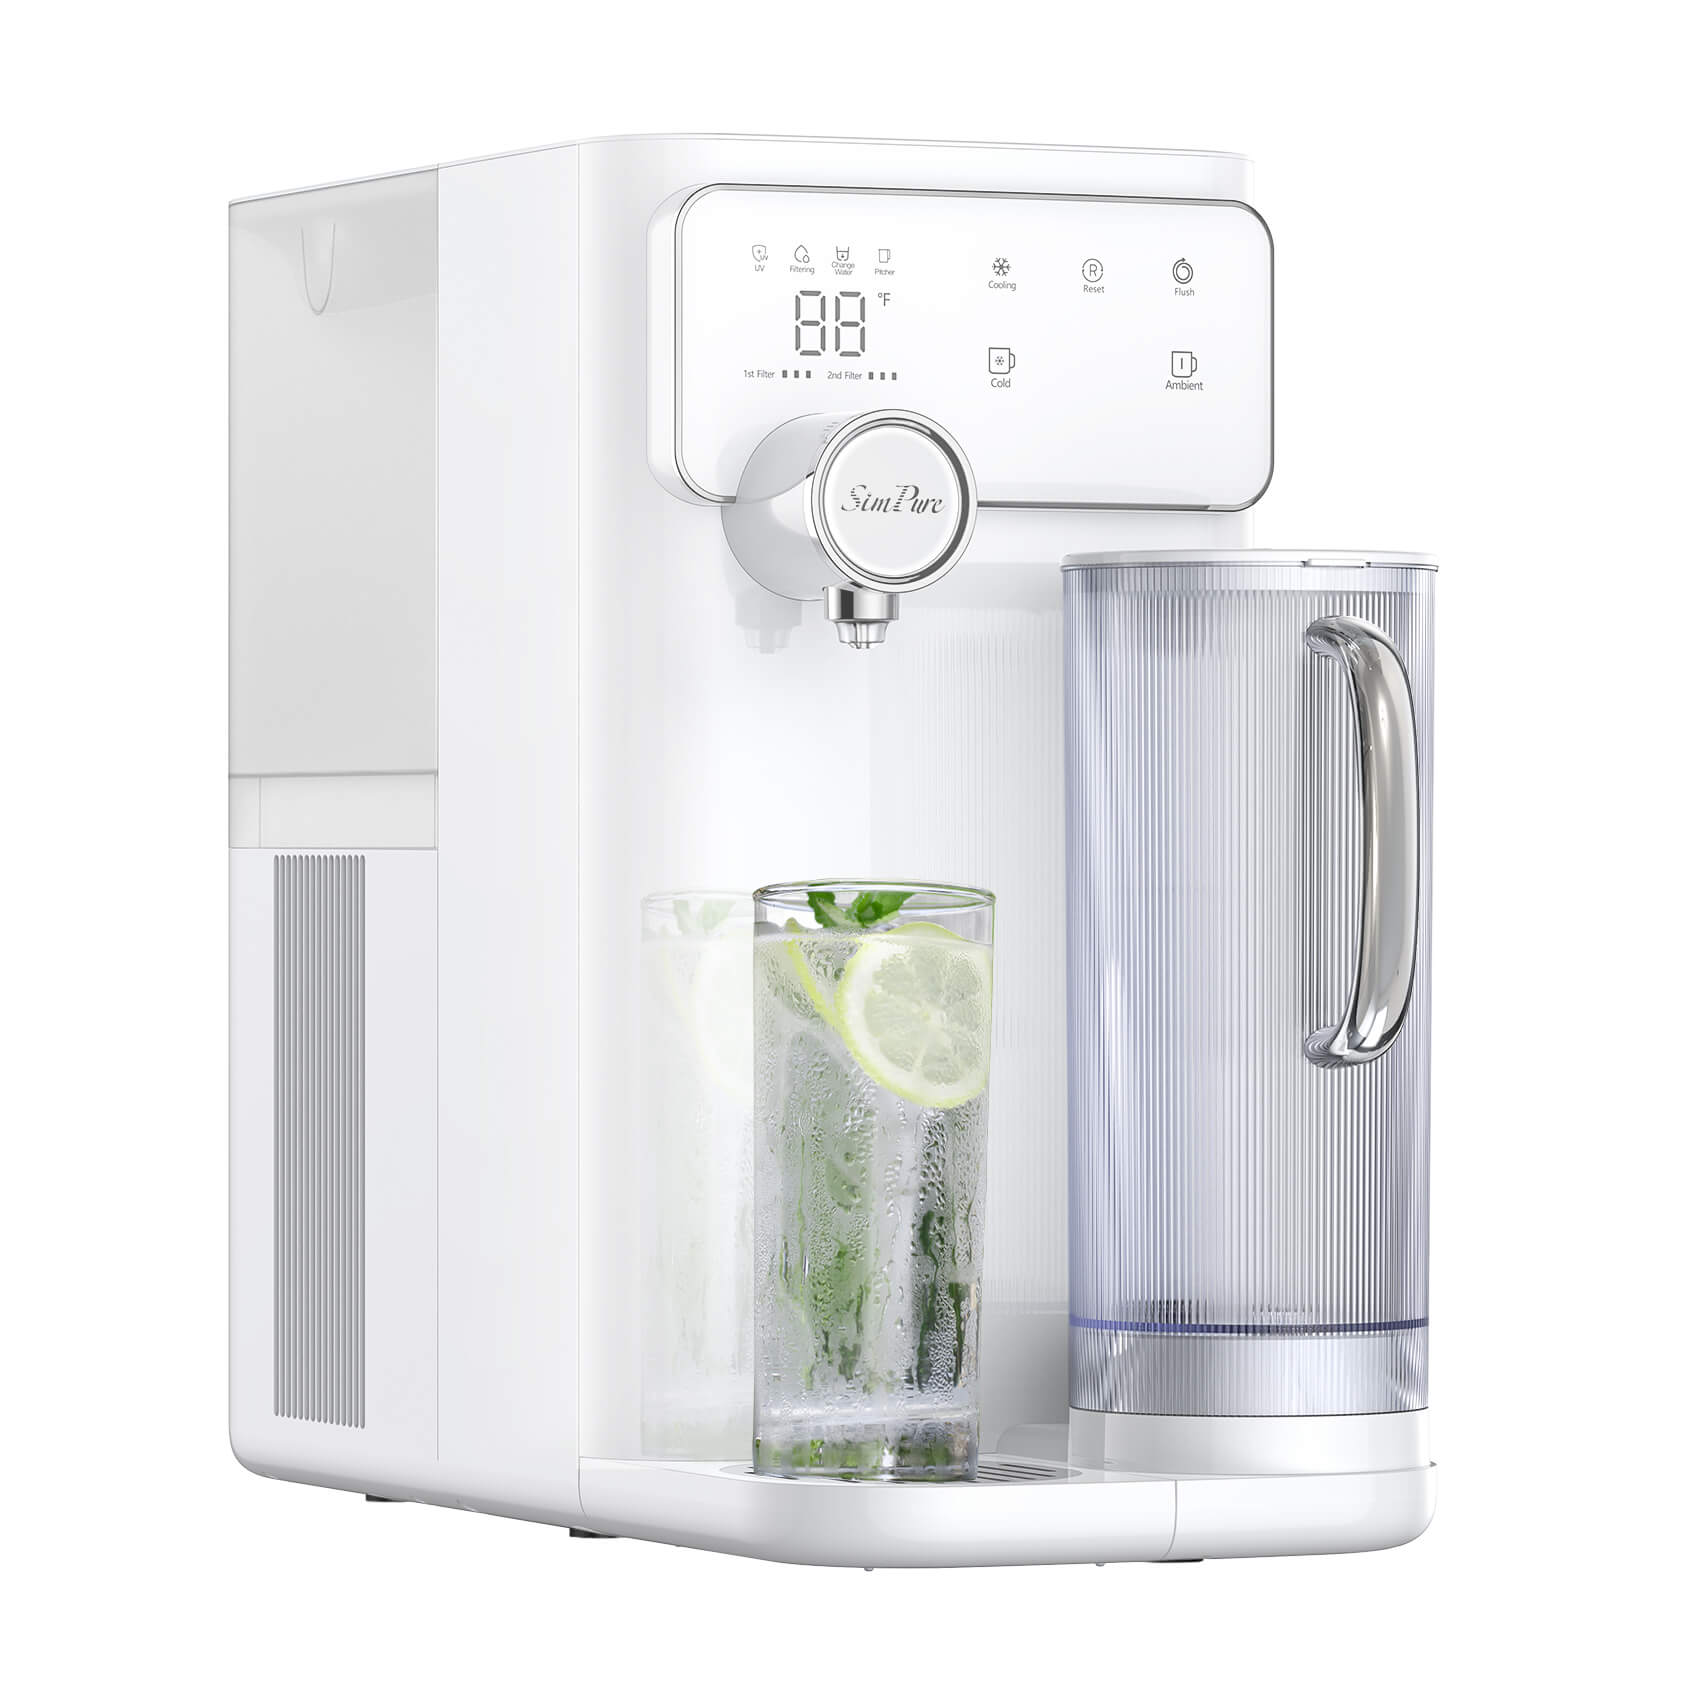 SimPure Y10C Cold Counetertop RO System Cooler Water Filter Dispenser | 5-in-1 RO+CTO+UV 7-Stage Filtration